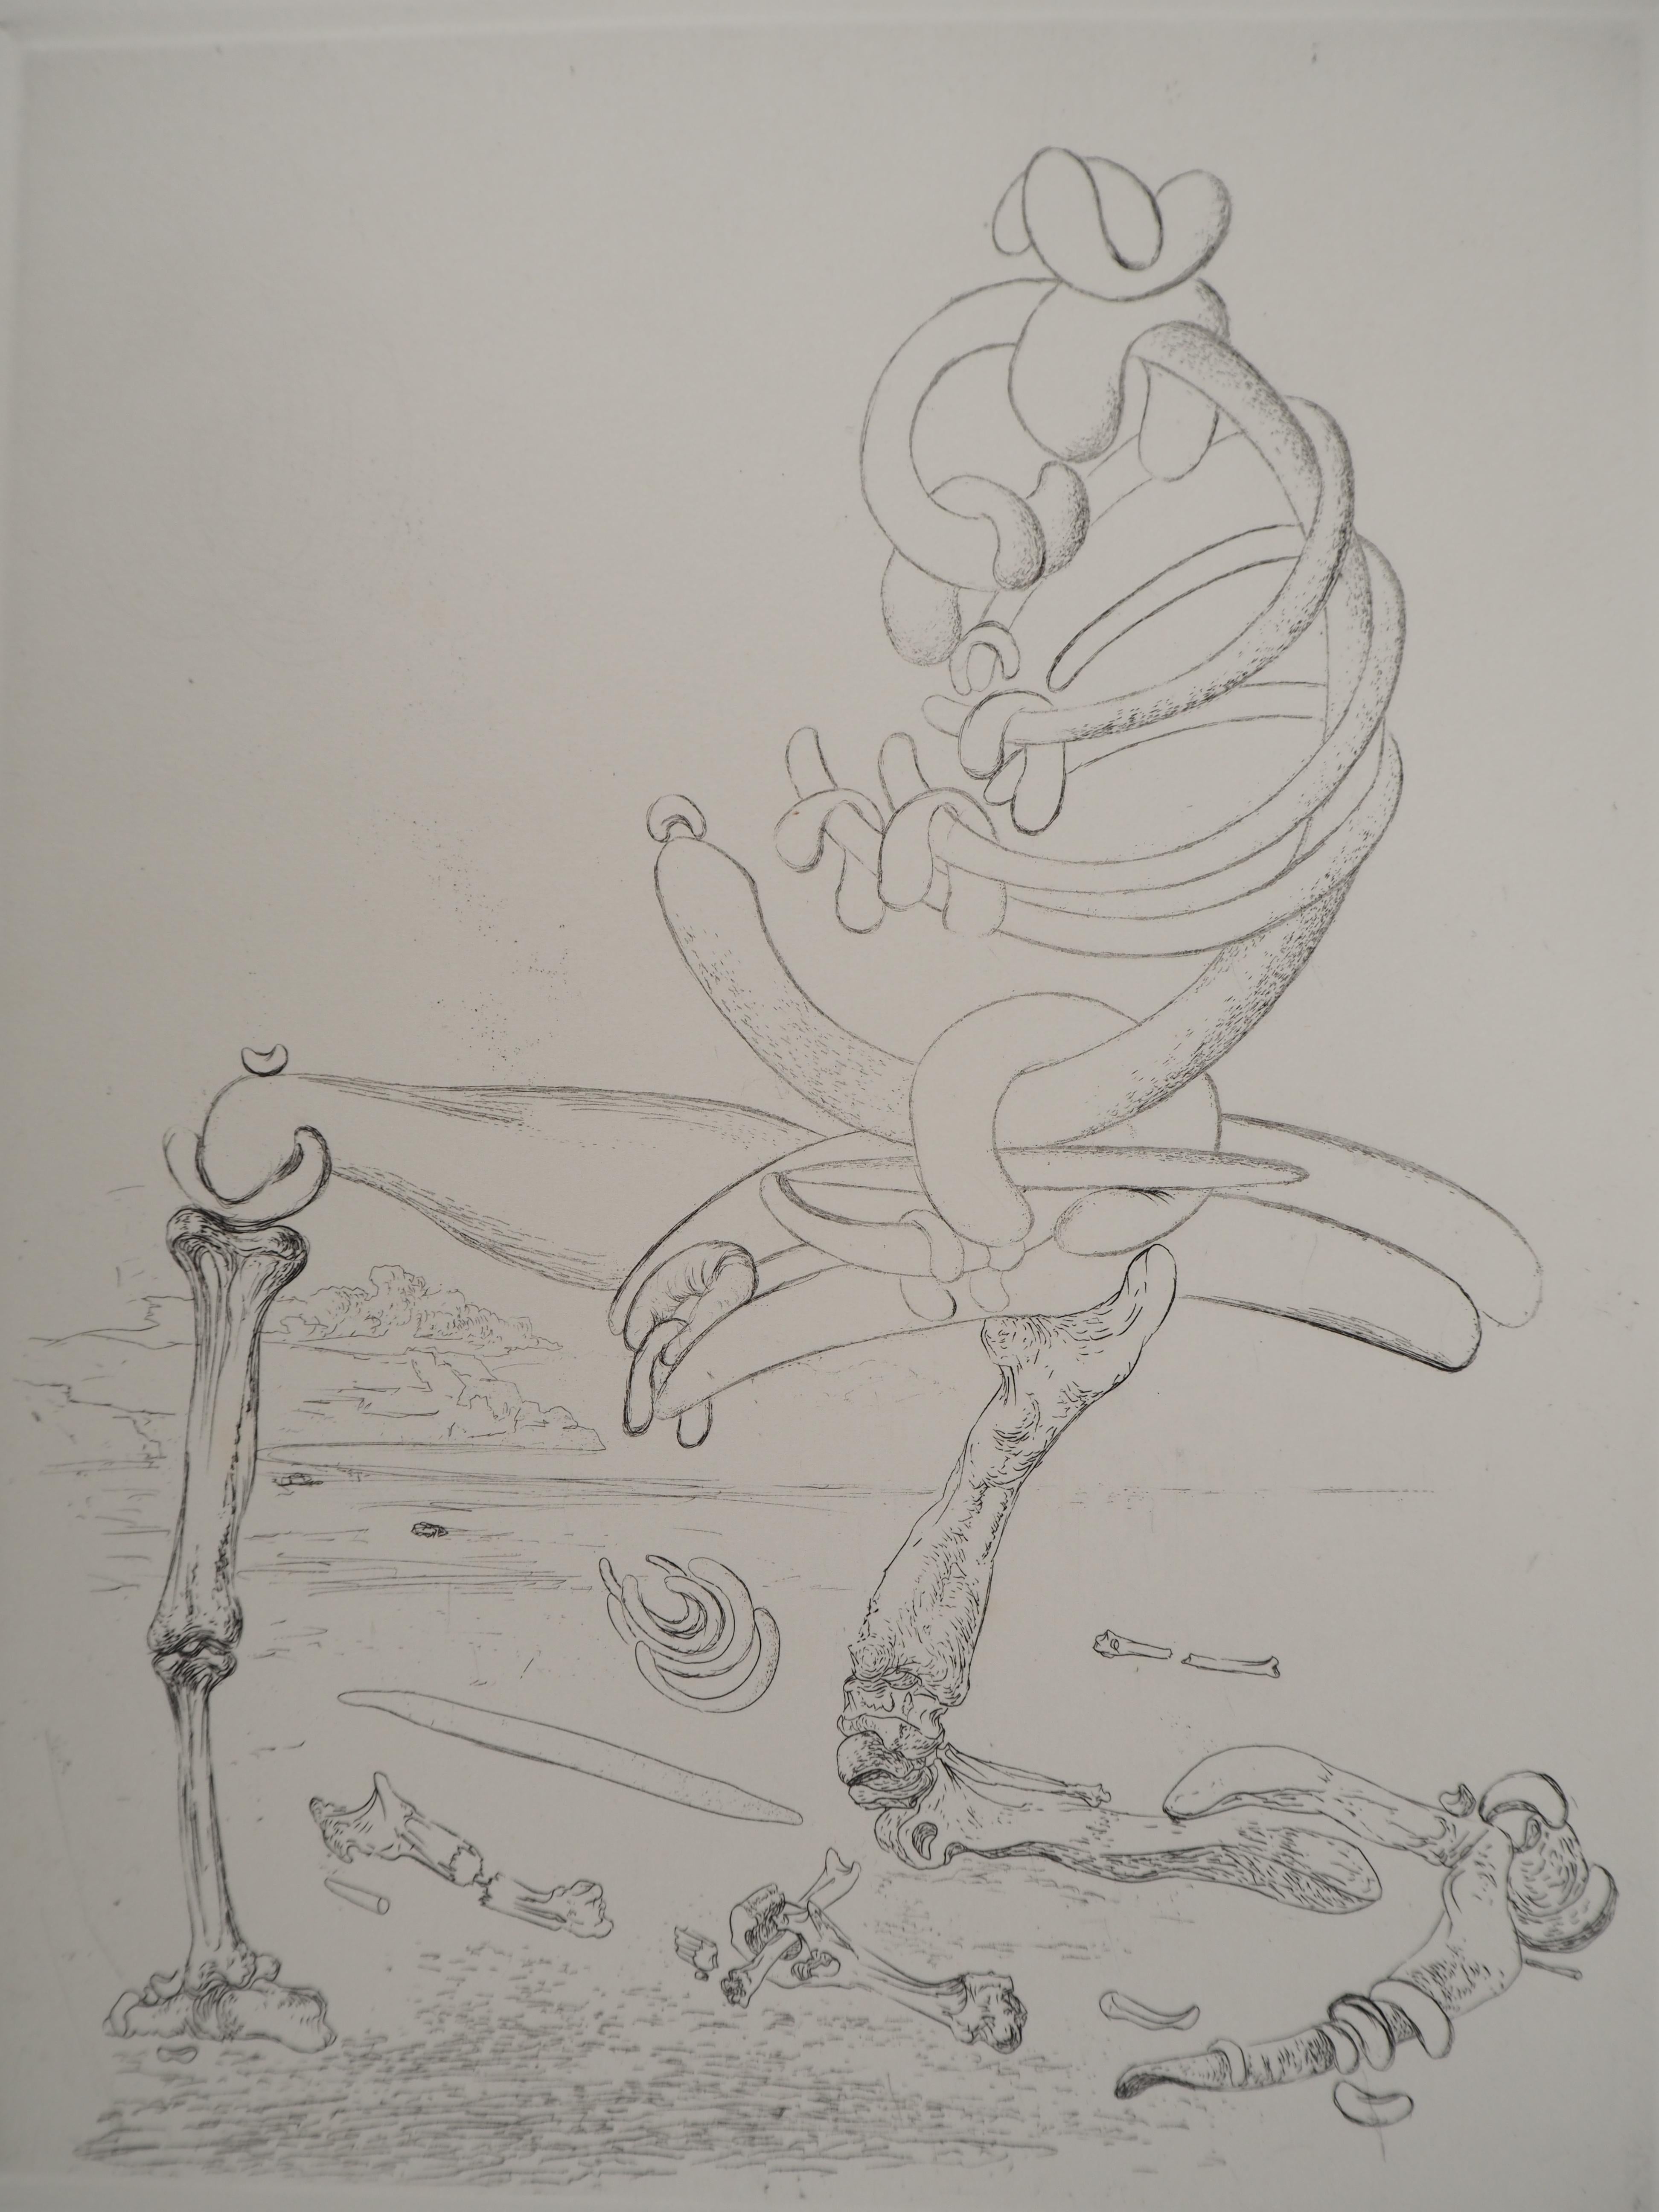 Surrealist Composition with Bones and Beans - Original etching, HANDSIGNED, 1975 - Print by Salvador Dalí